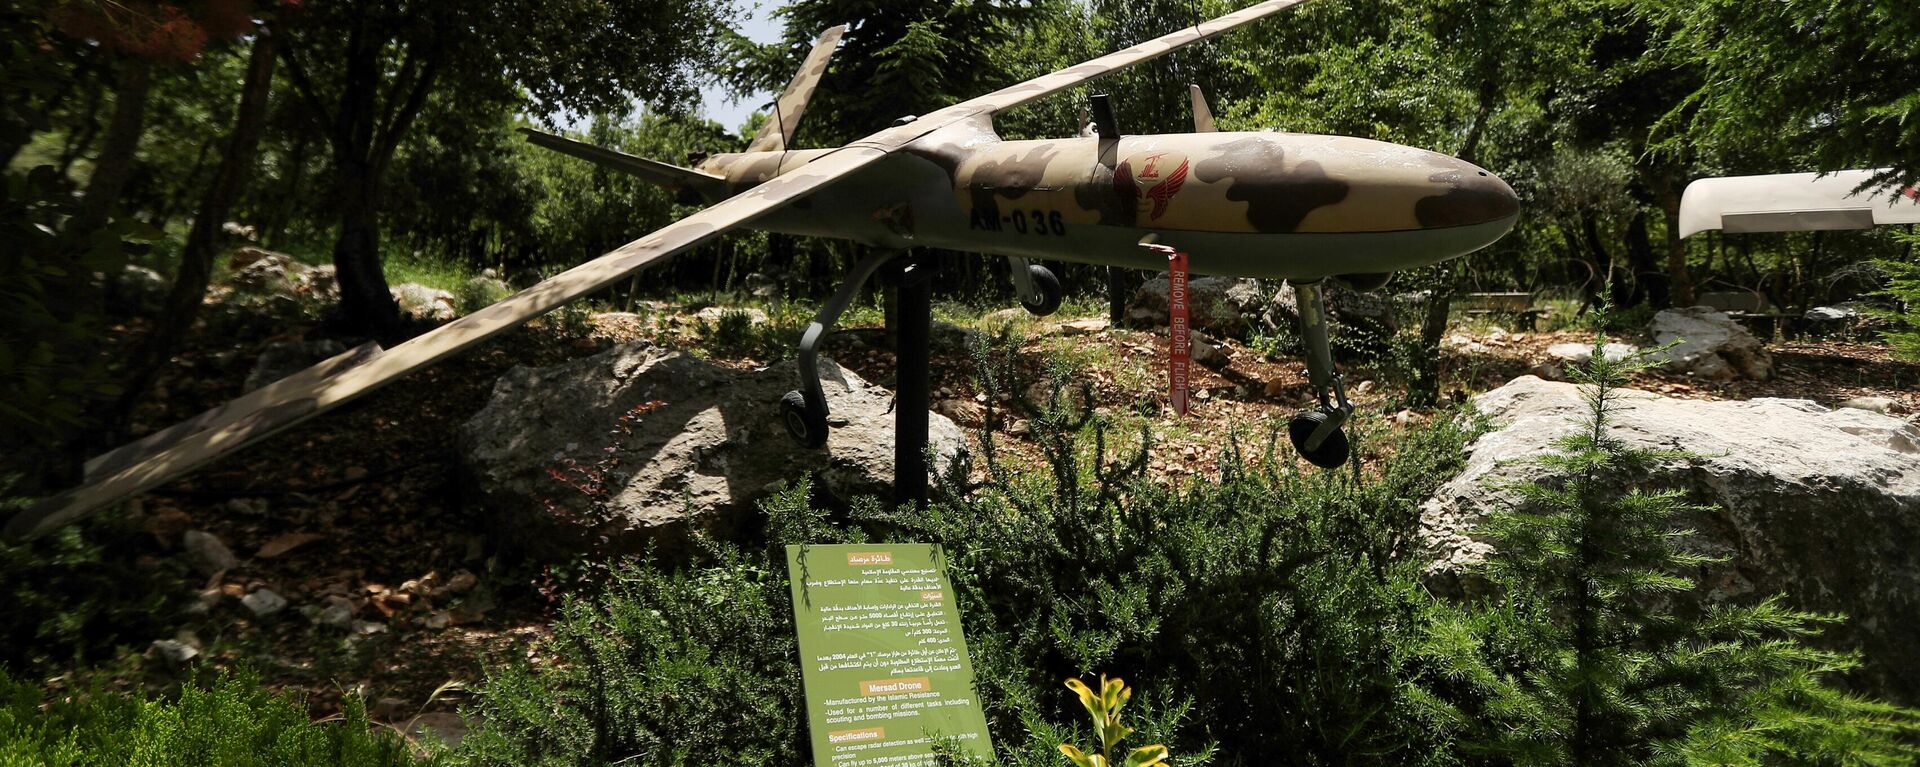 A picture taken on May 22, 2020 shows a military drone at the Hezbollah memorial landmark in the hilltop bastion of Mleeta, built in 2010 to commemorate Israel's withdrawal from the country, near the Lebanese southern village of Jarjouaa. - Sputnik International, 1920, 02.06.2024